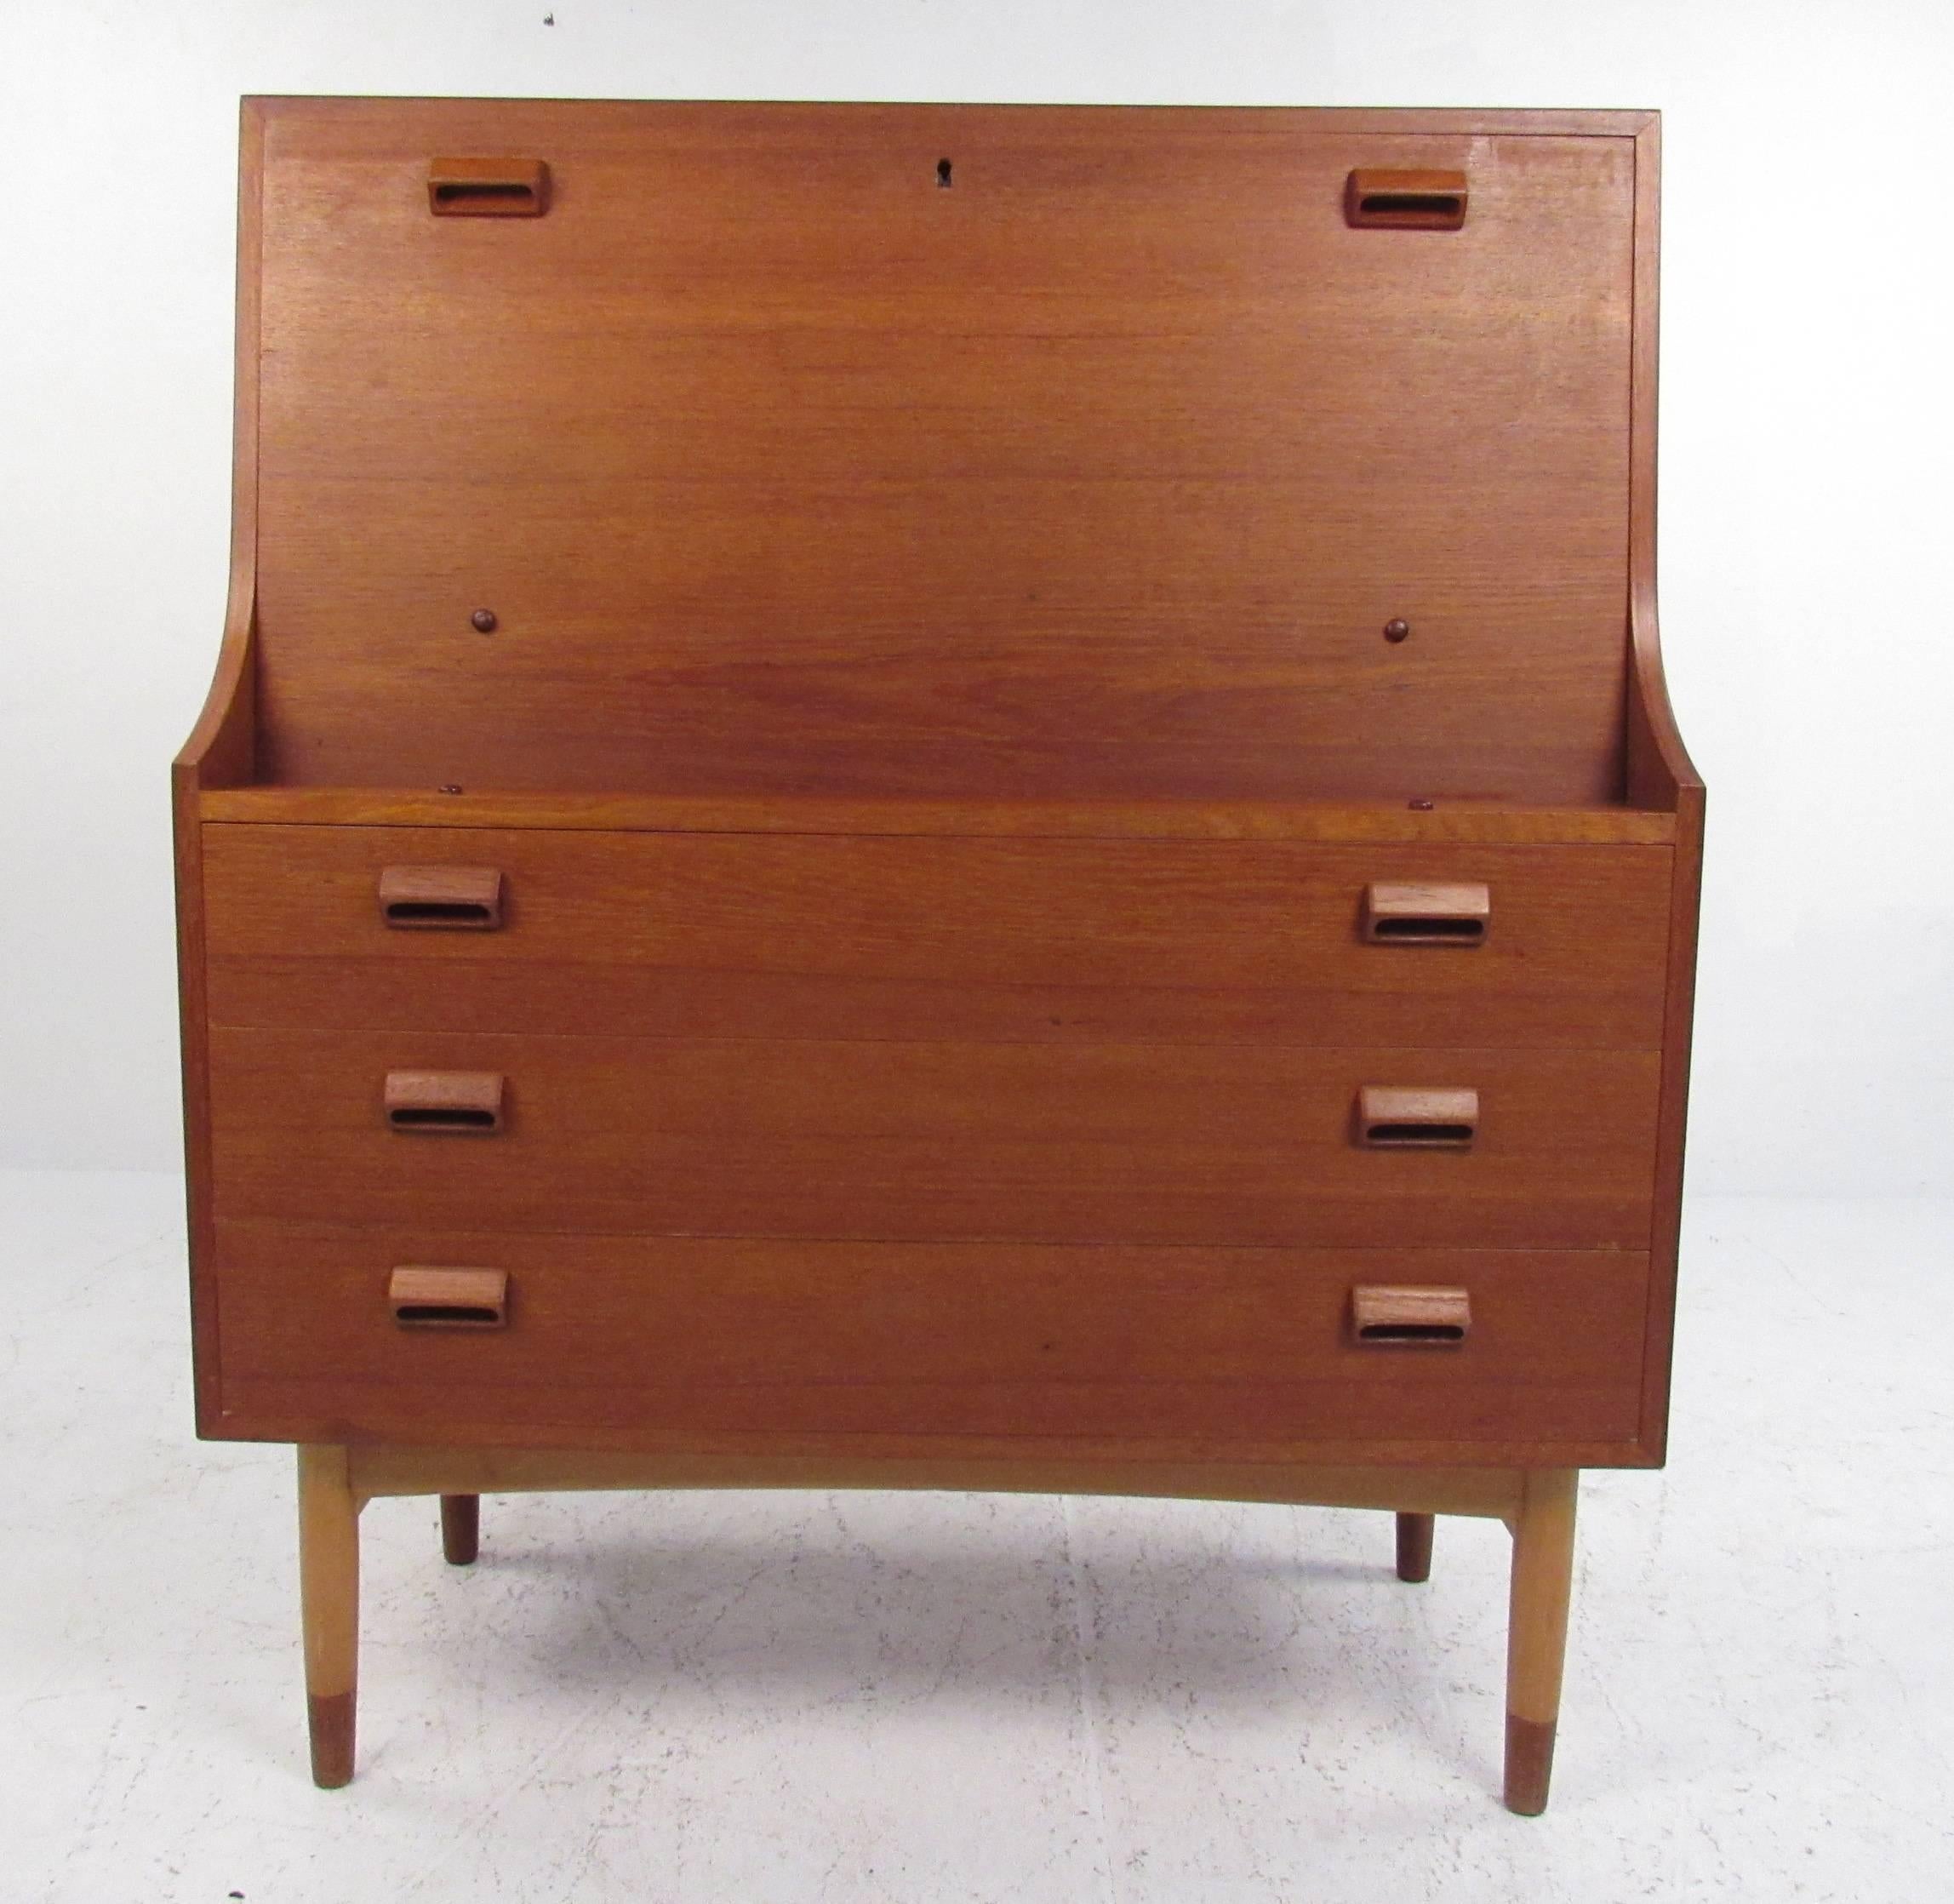 Nicely designed, compact drop front secretary with three drawers below and storage or cubby holes as well as a writing surface on top. Please confirm item location (NY or NJ) with dealer.